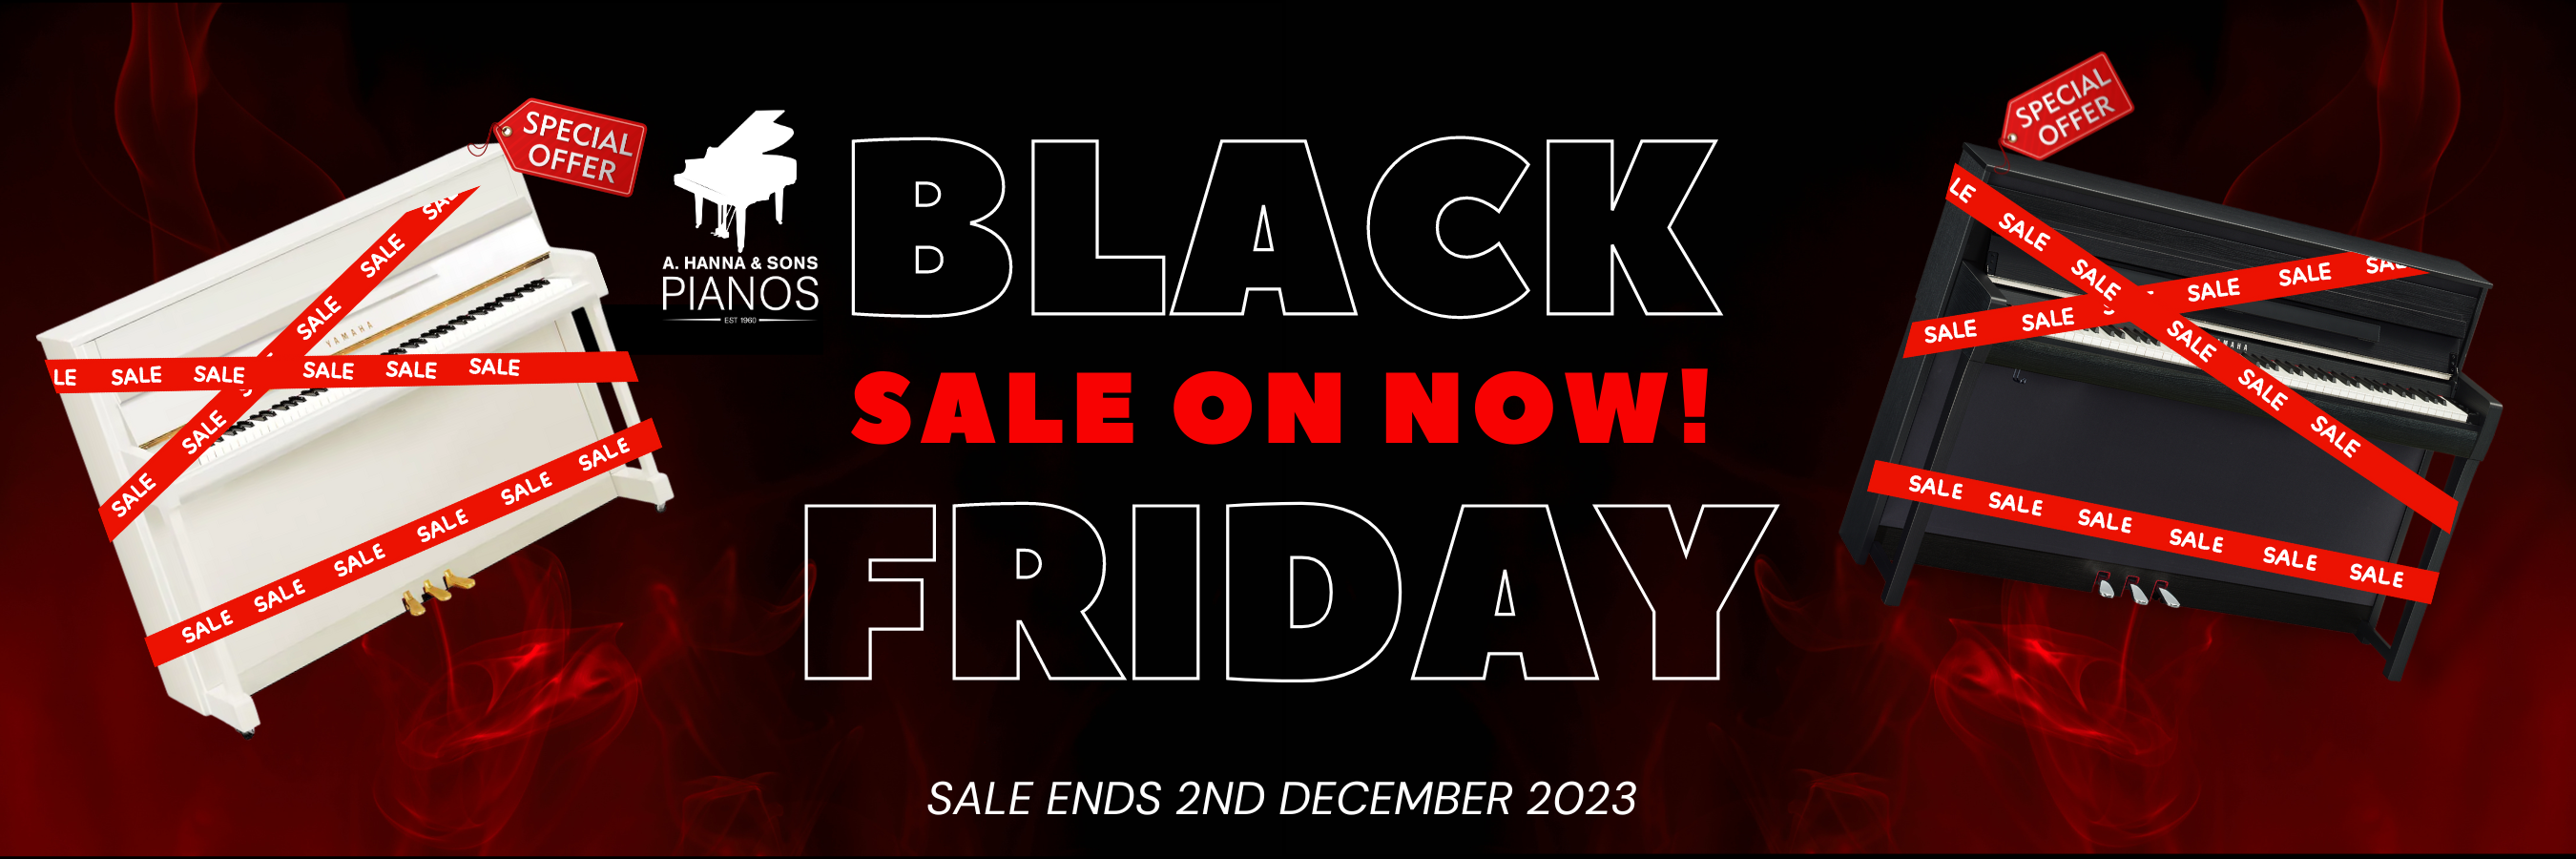 Black Friday 2023 Sale now on